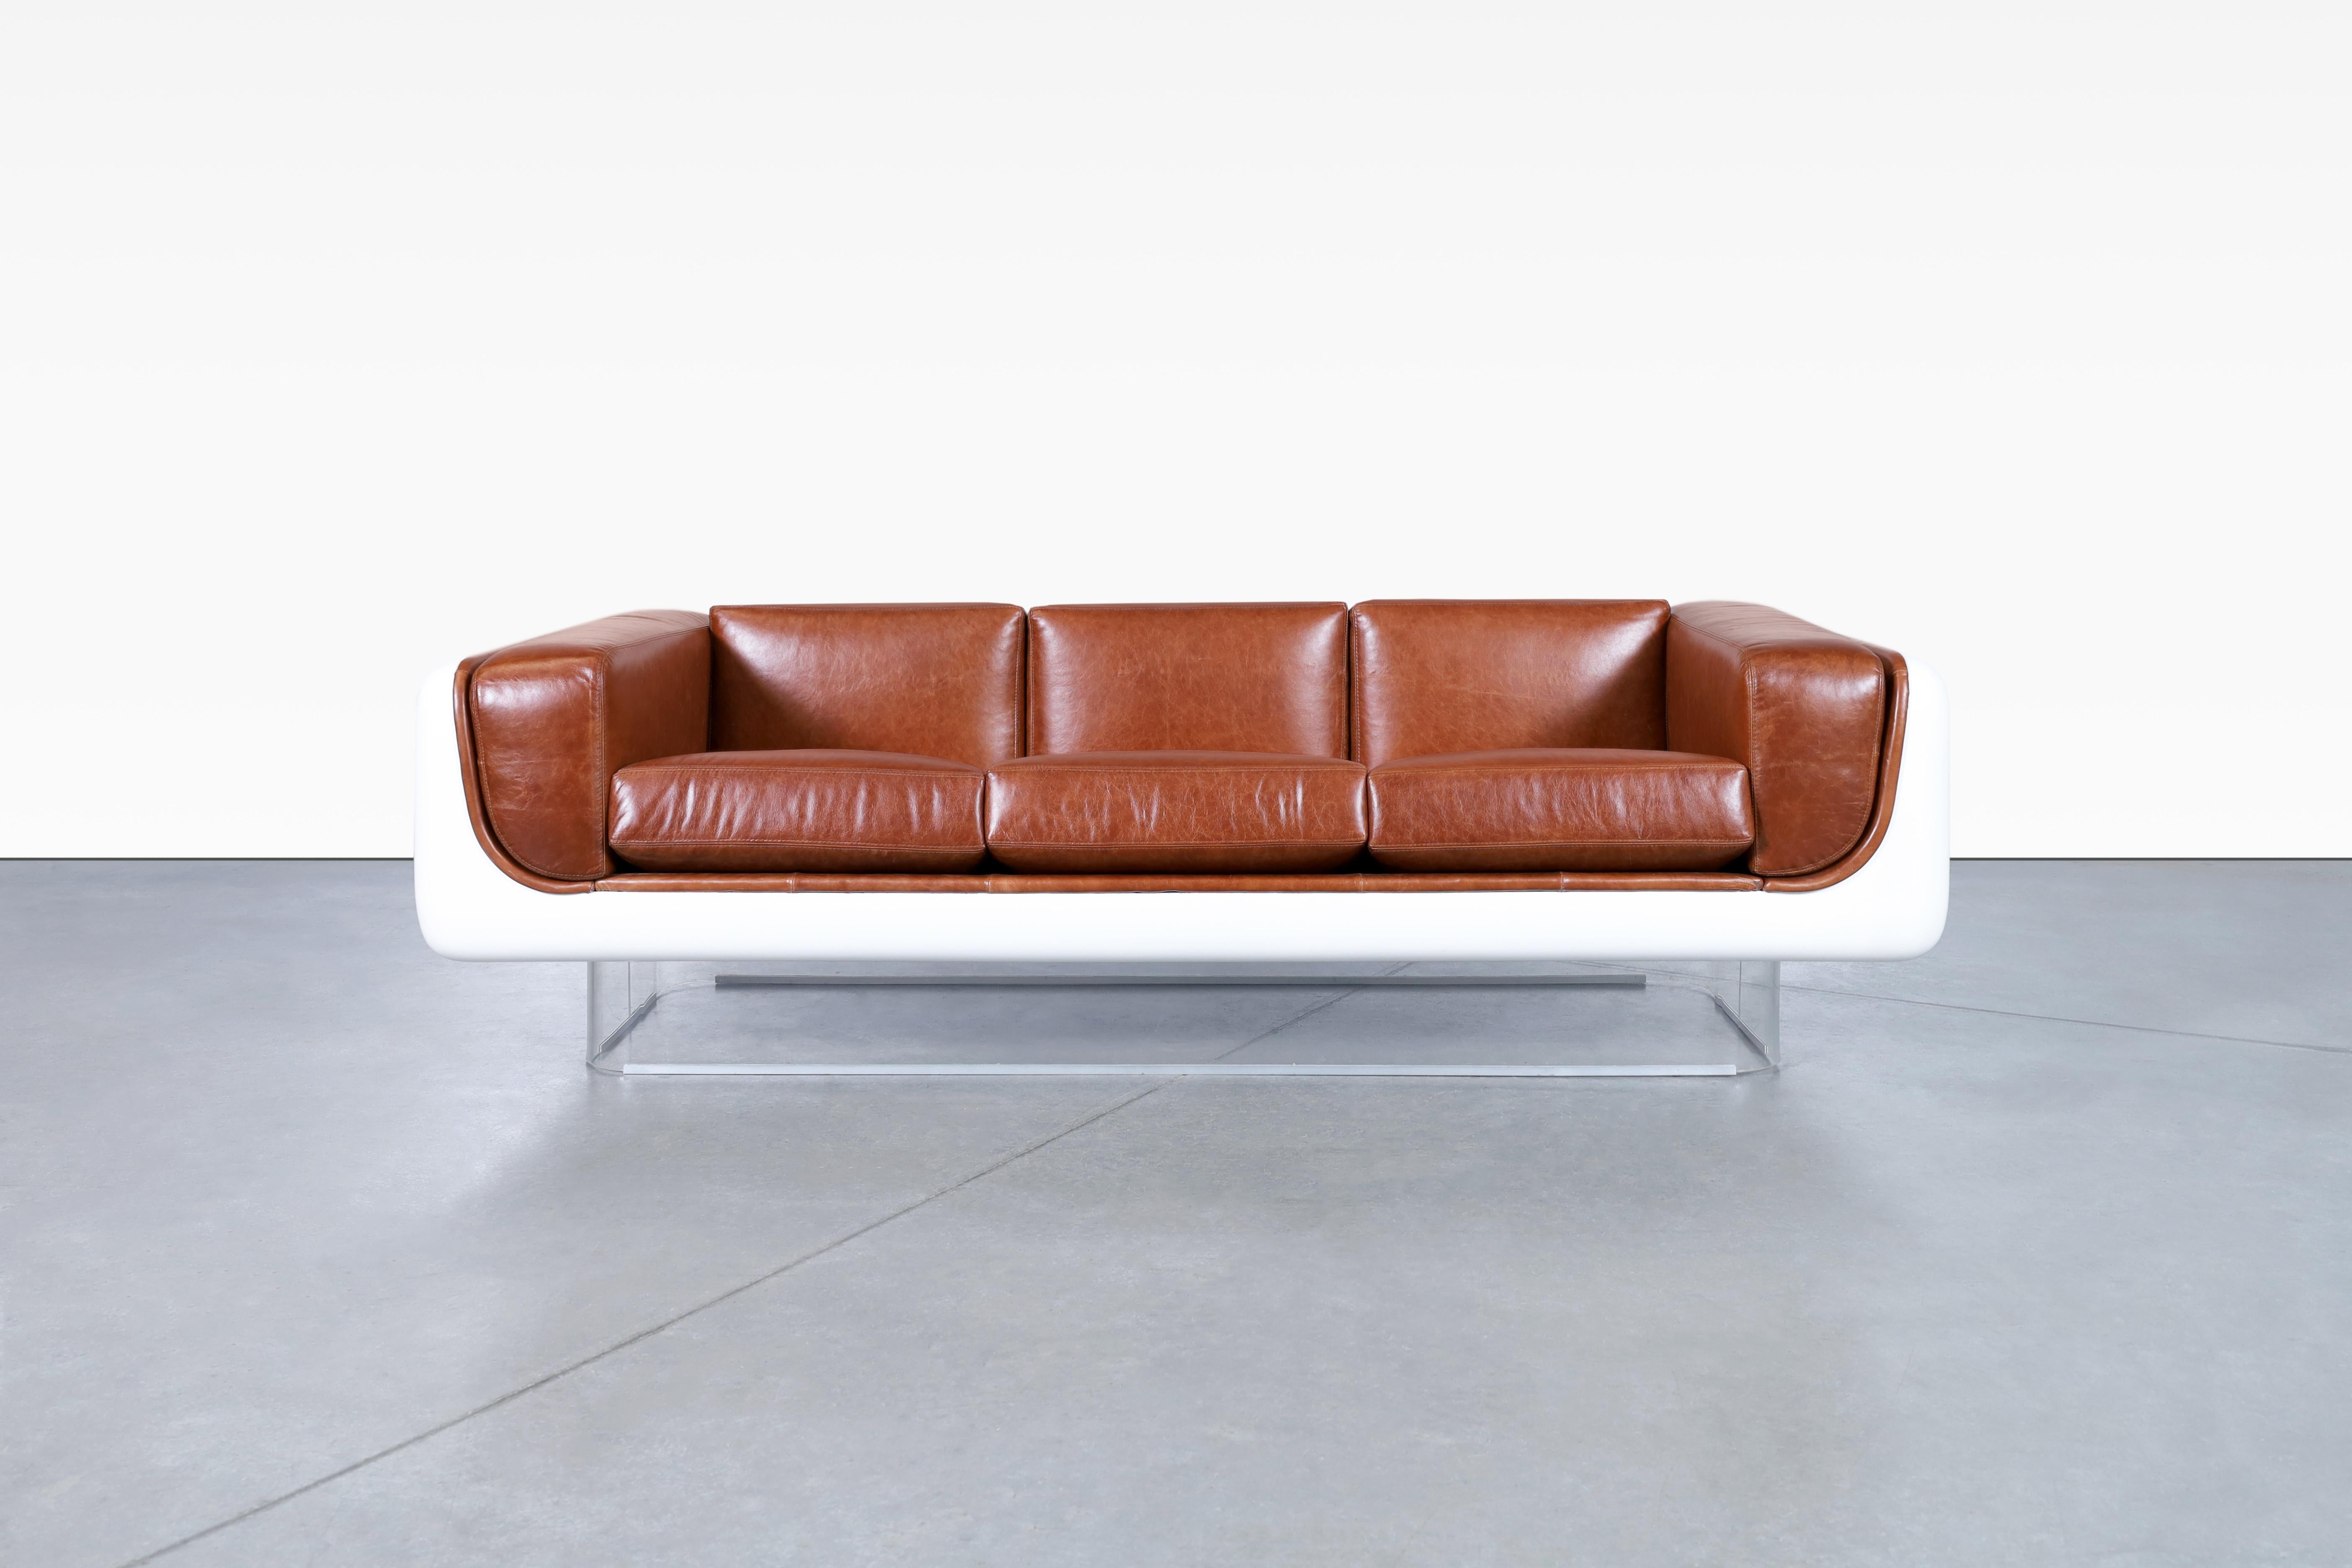 Beautiful vintage leather and lucite sofa designed by William C. Andrus for Steelcase in the United States, circa 1970’s. The newly reupholstered sofa is not just a stunning piece of furniture, it is a work of art that will take your breath away.